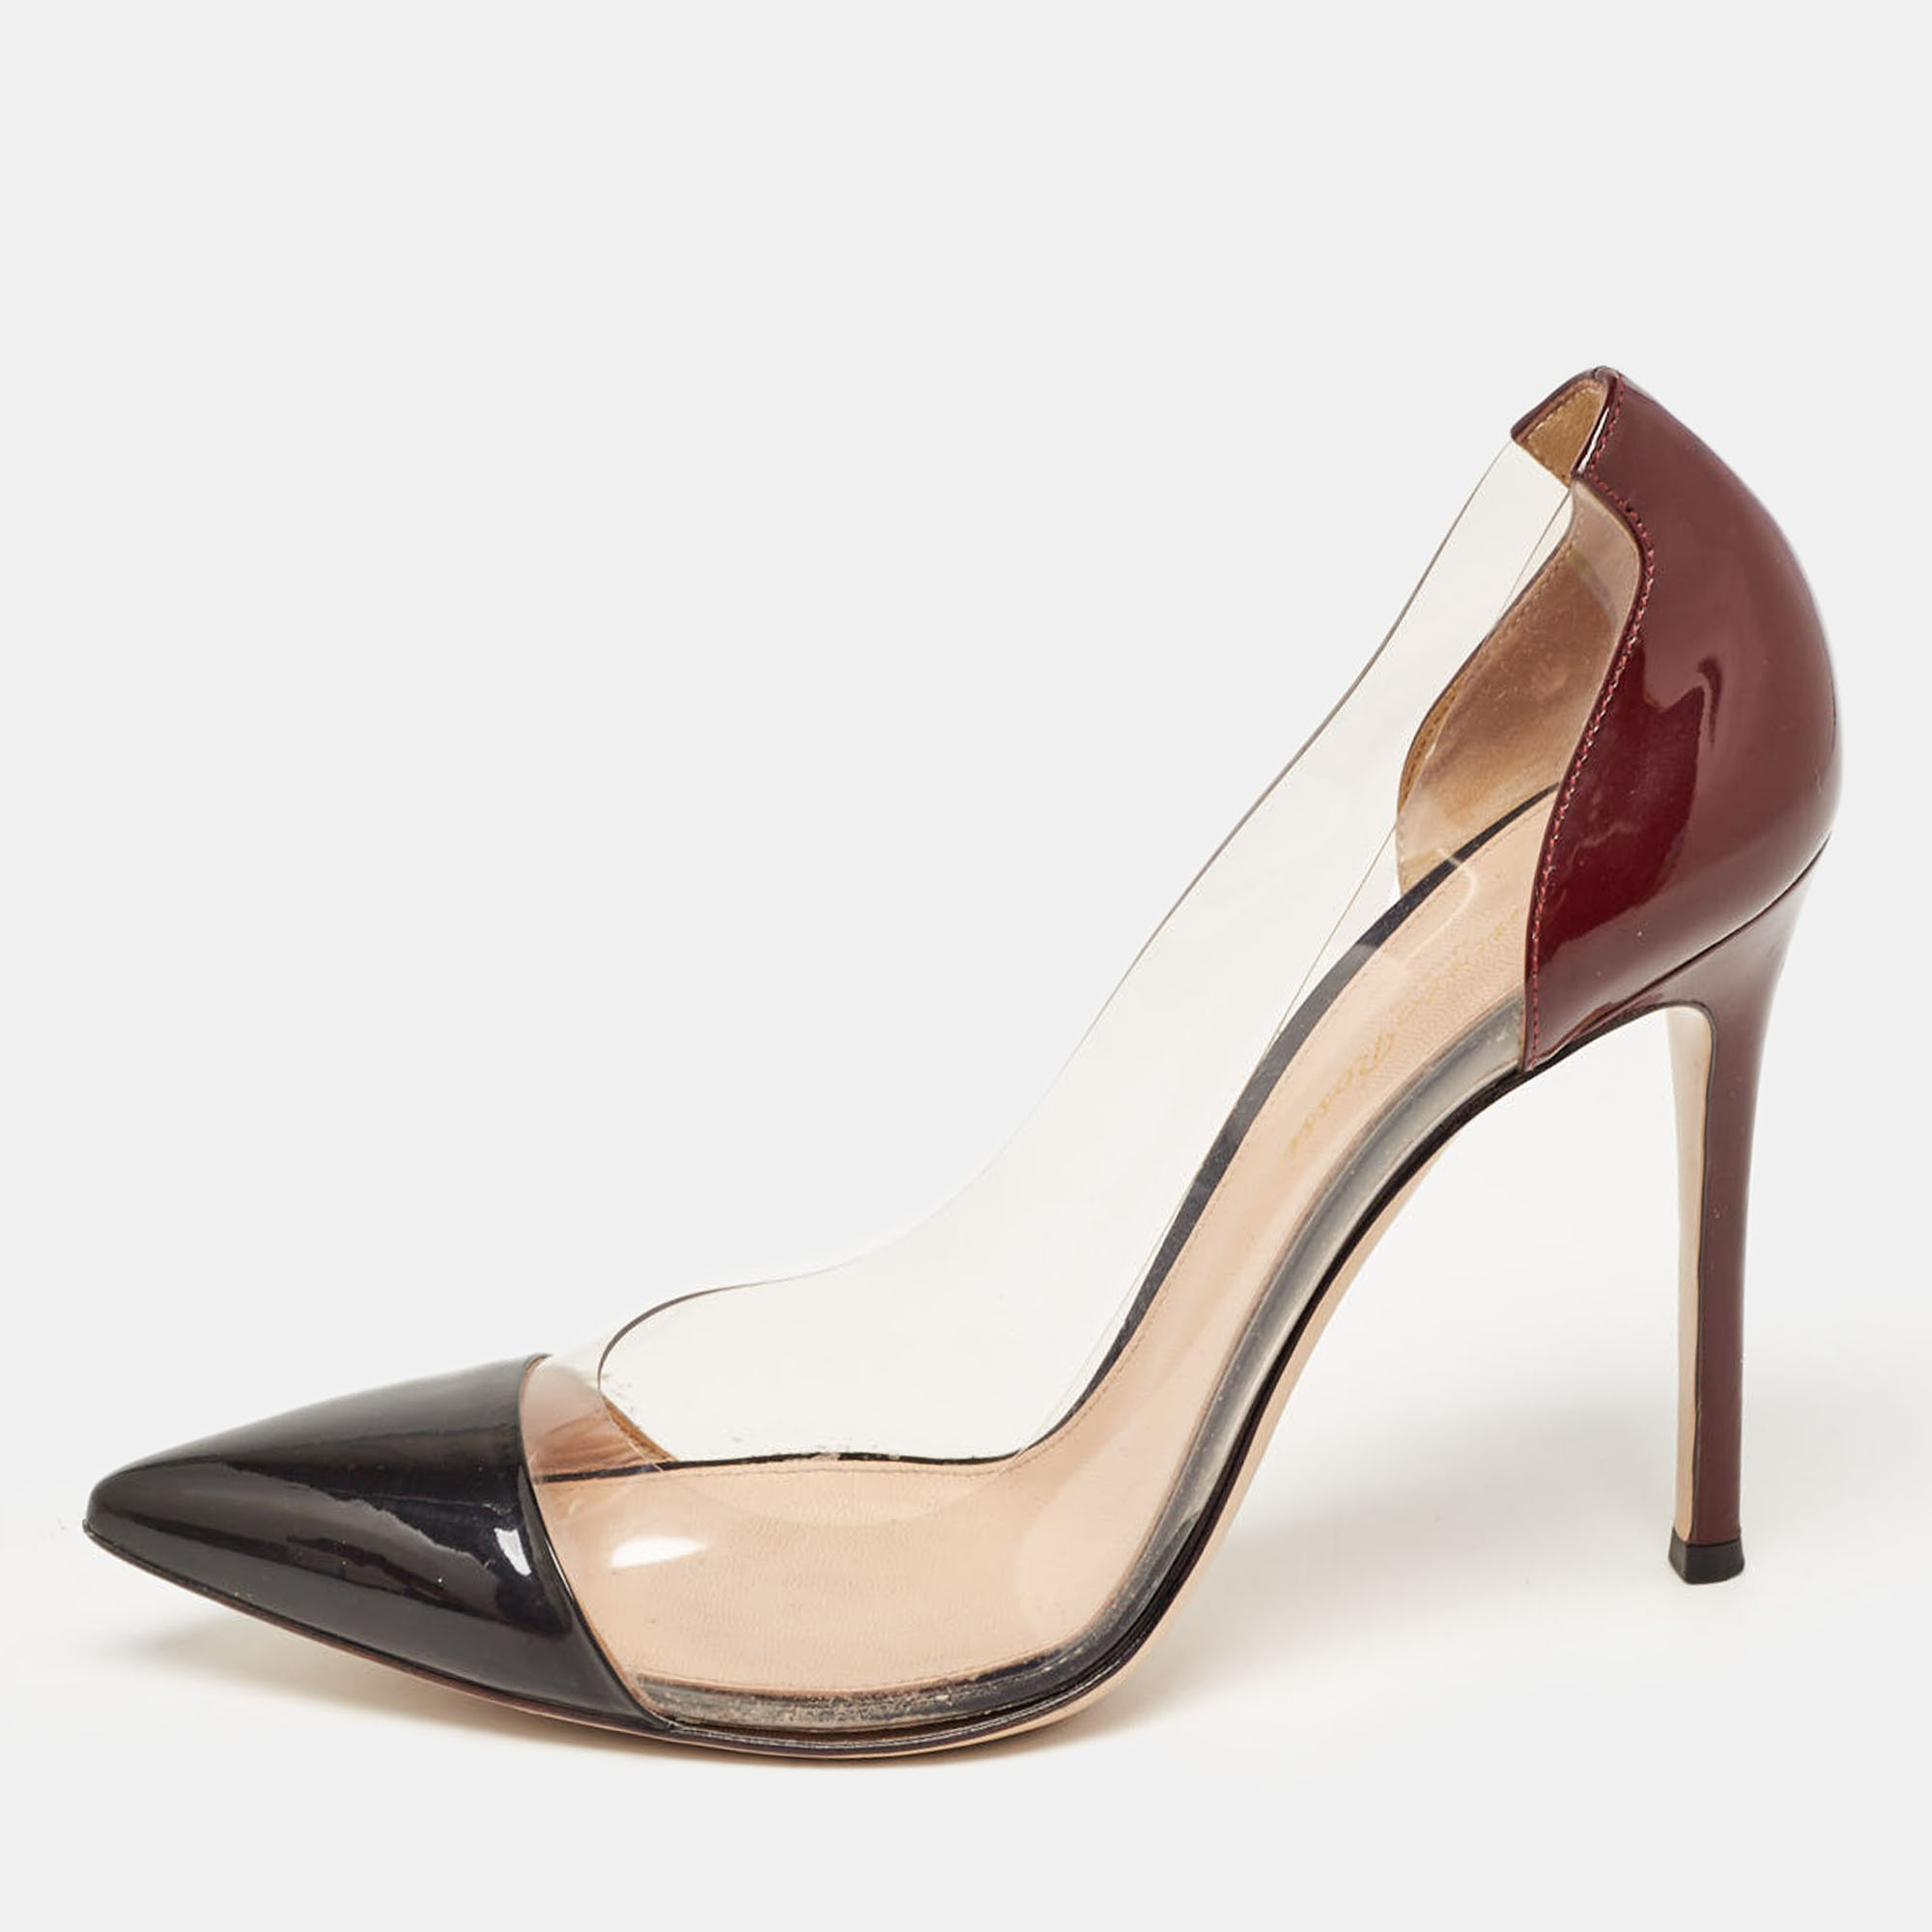 Gianvito Rossi Two Tone Patent Leather And PVC Plexi Pointed Toe Pumps Size 38.5